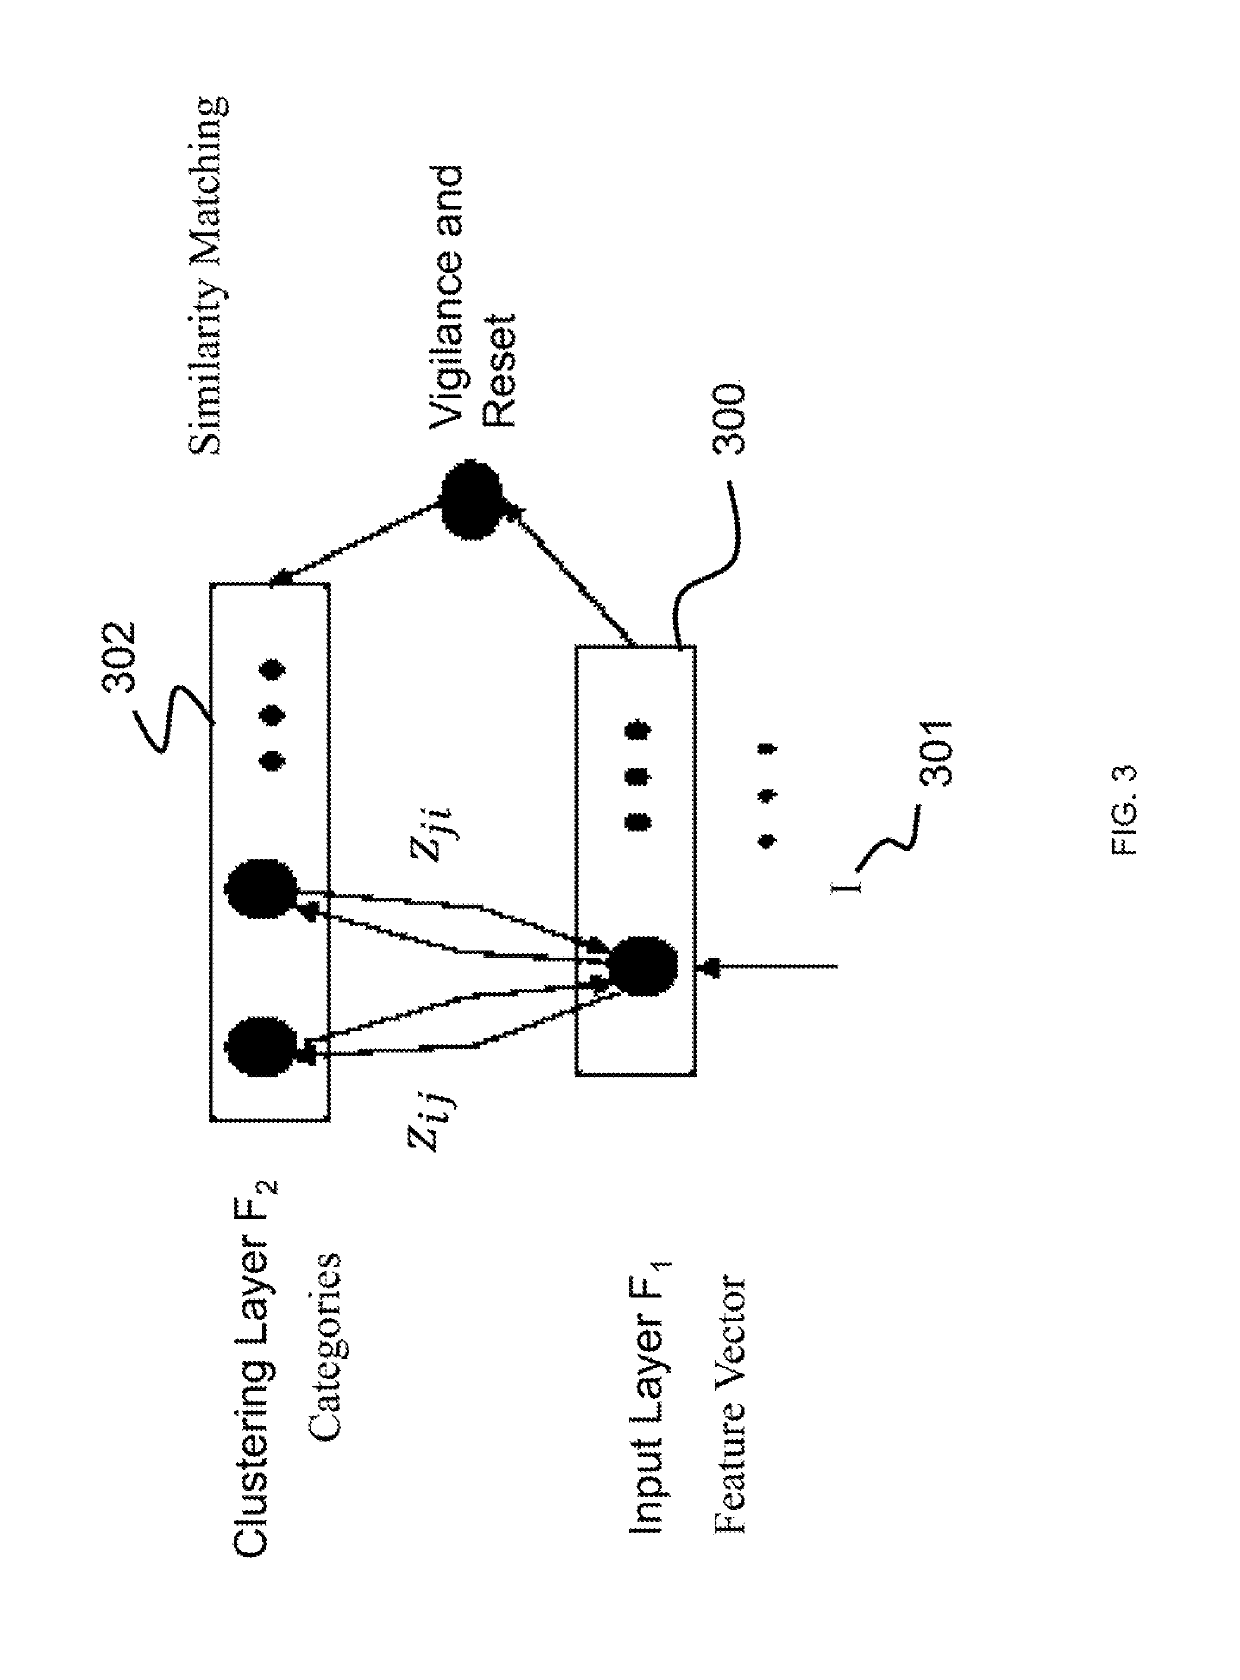 System and method for online deep learning in an ultra-low power consumption state